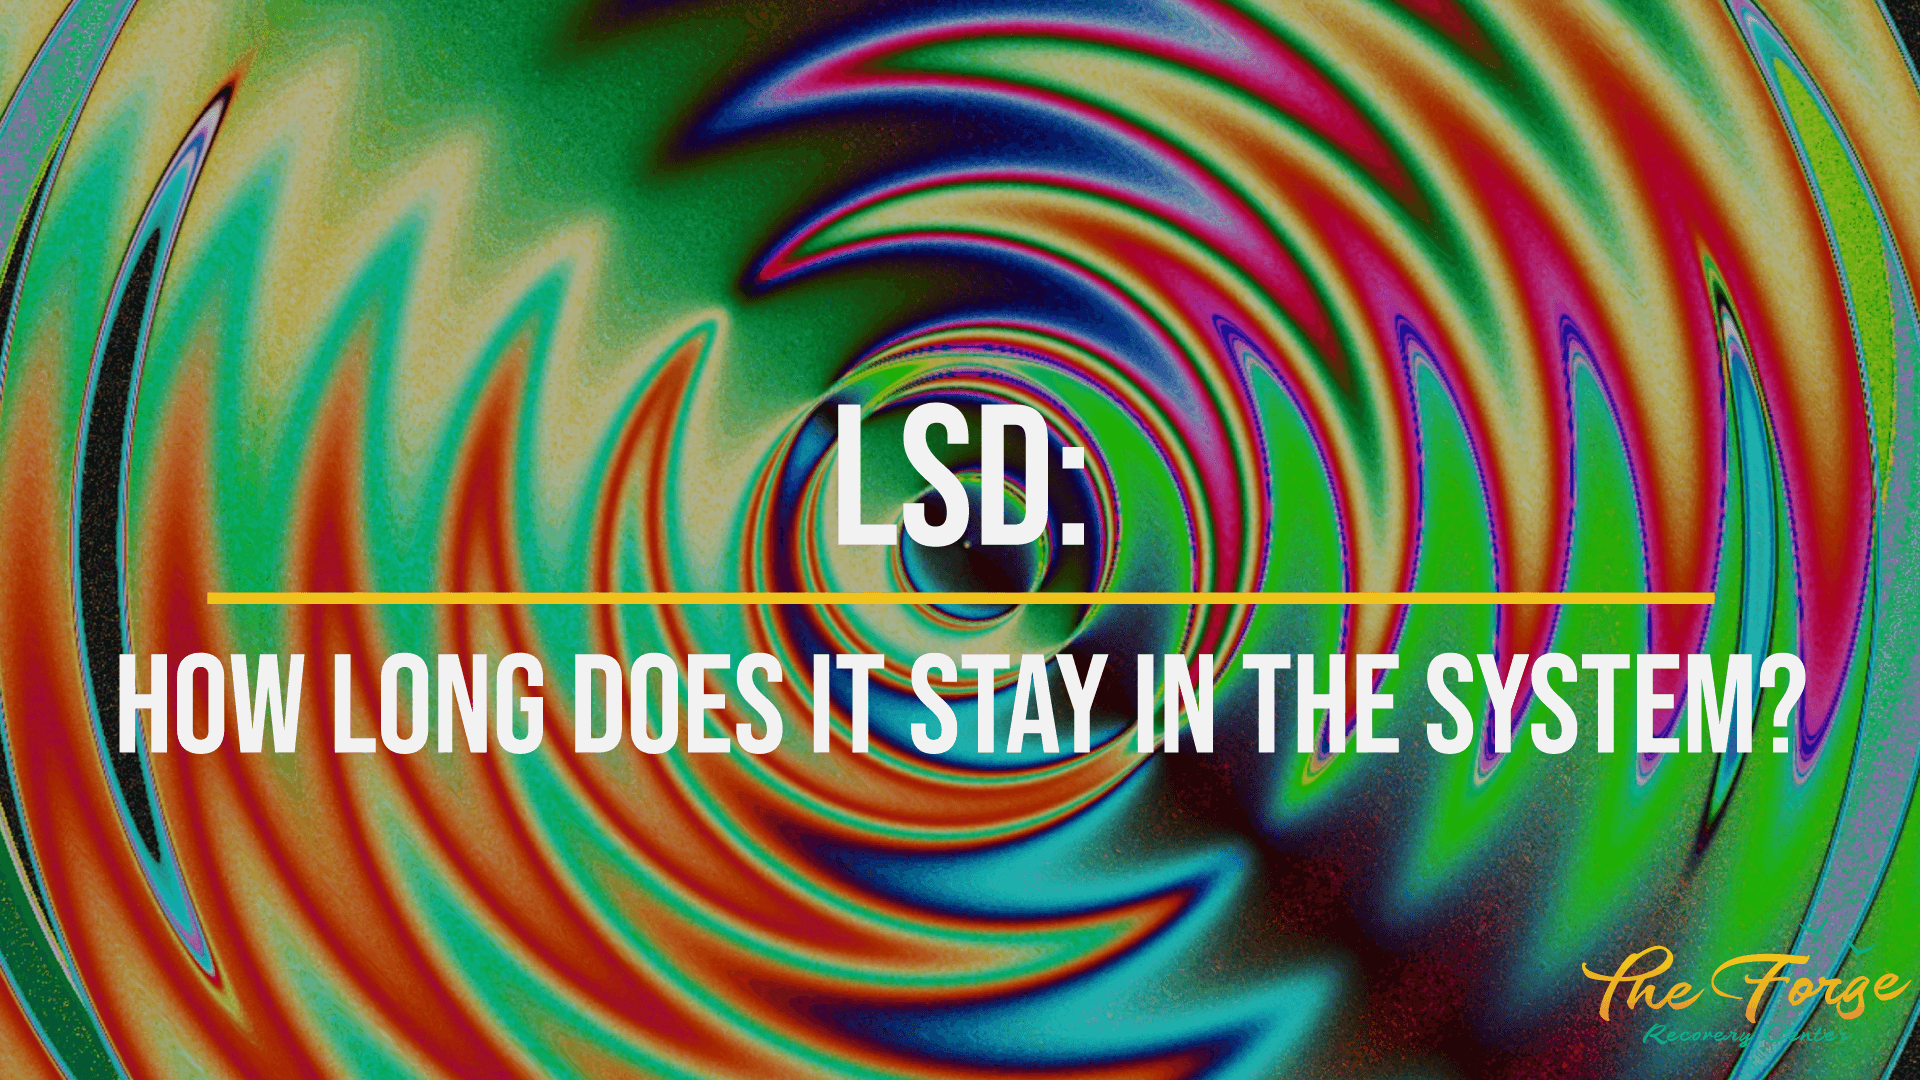 LSD: How Long Does LSD Stay in Your System? What are the Other Effects of this Drug?